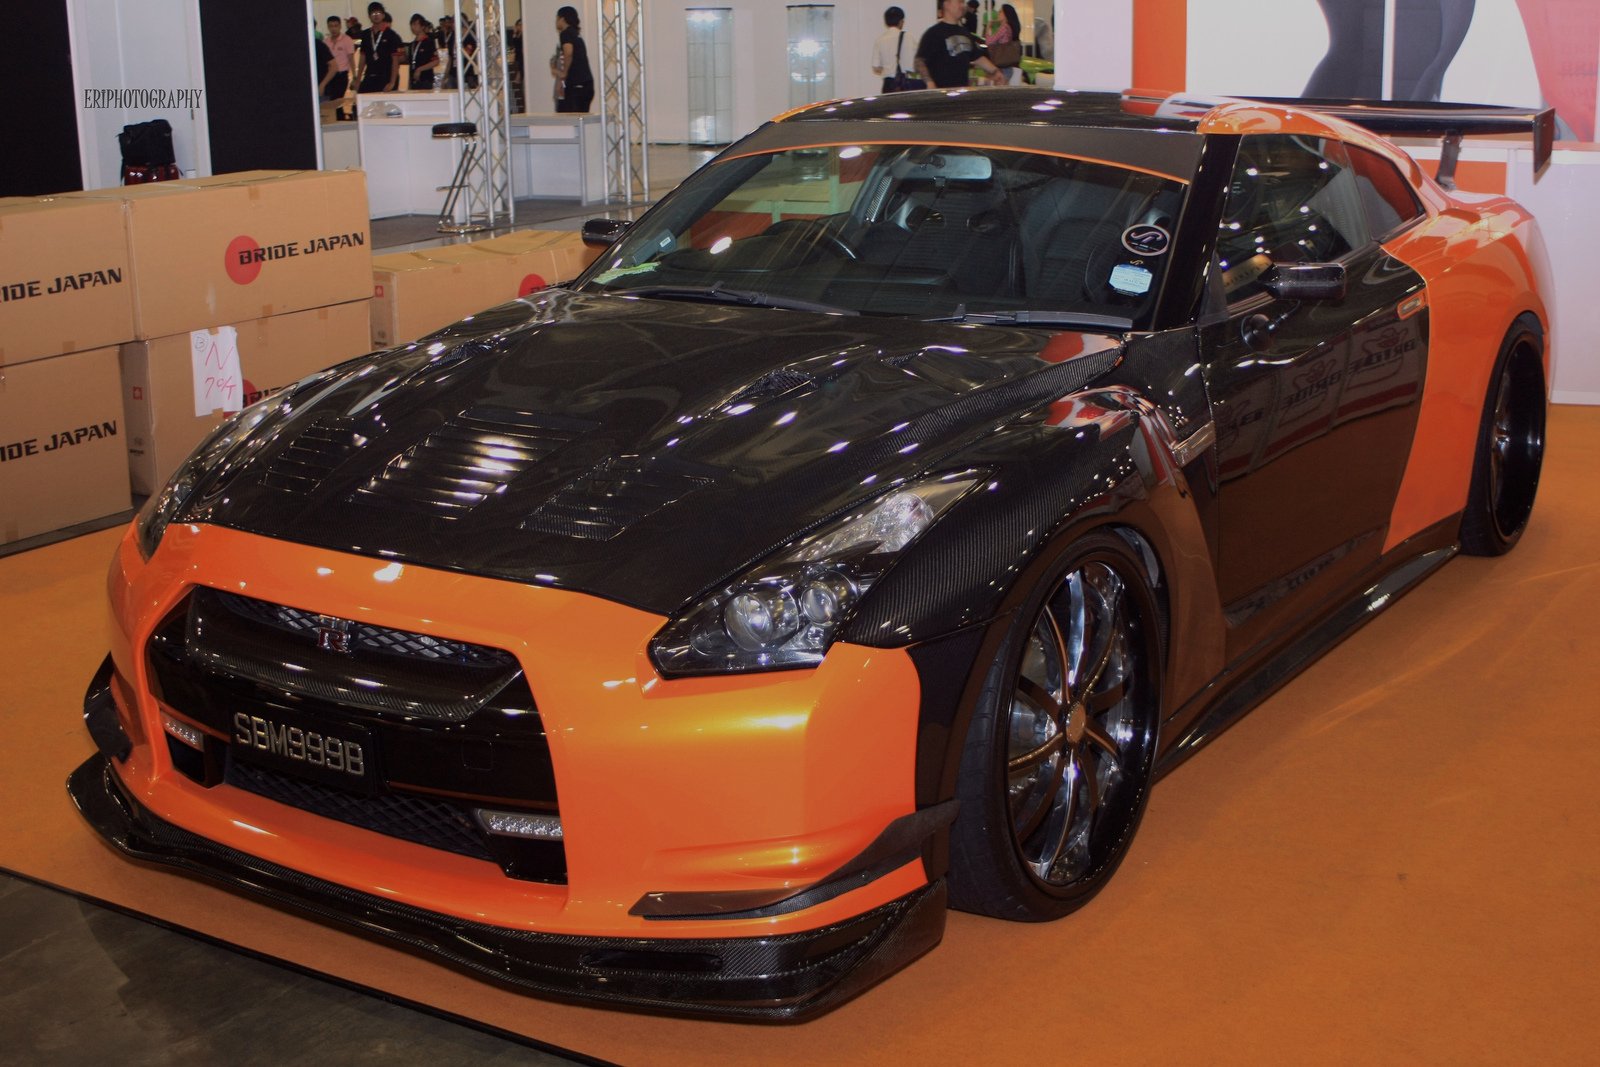 gt r, Nismo, Nissan, R35, Tuning, Supercar, Coupe, Japan, Cars, Orange Wallpaper